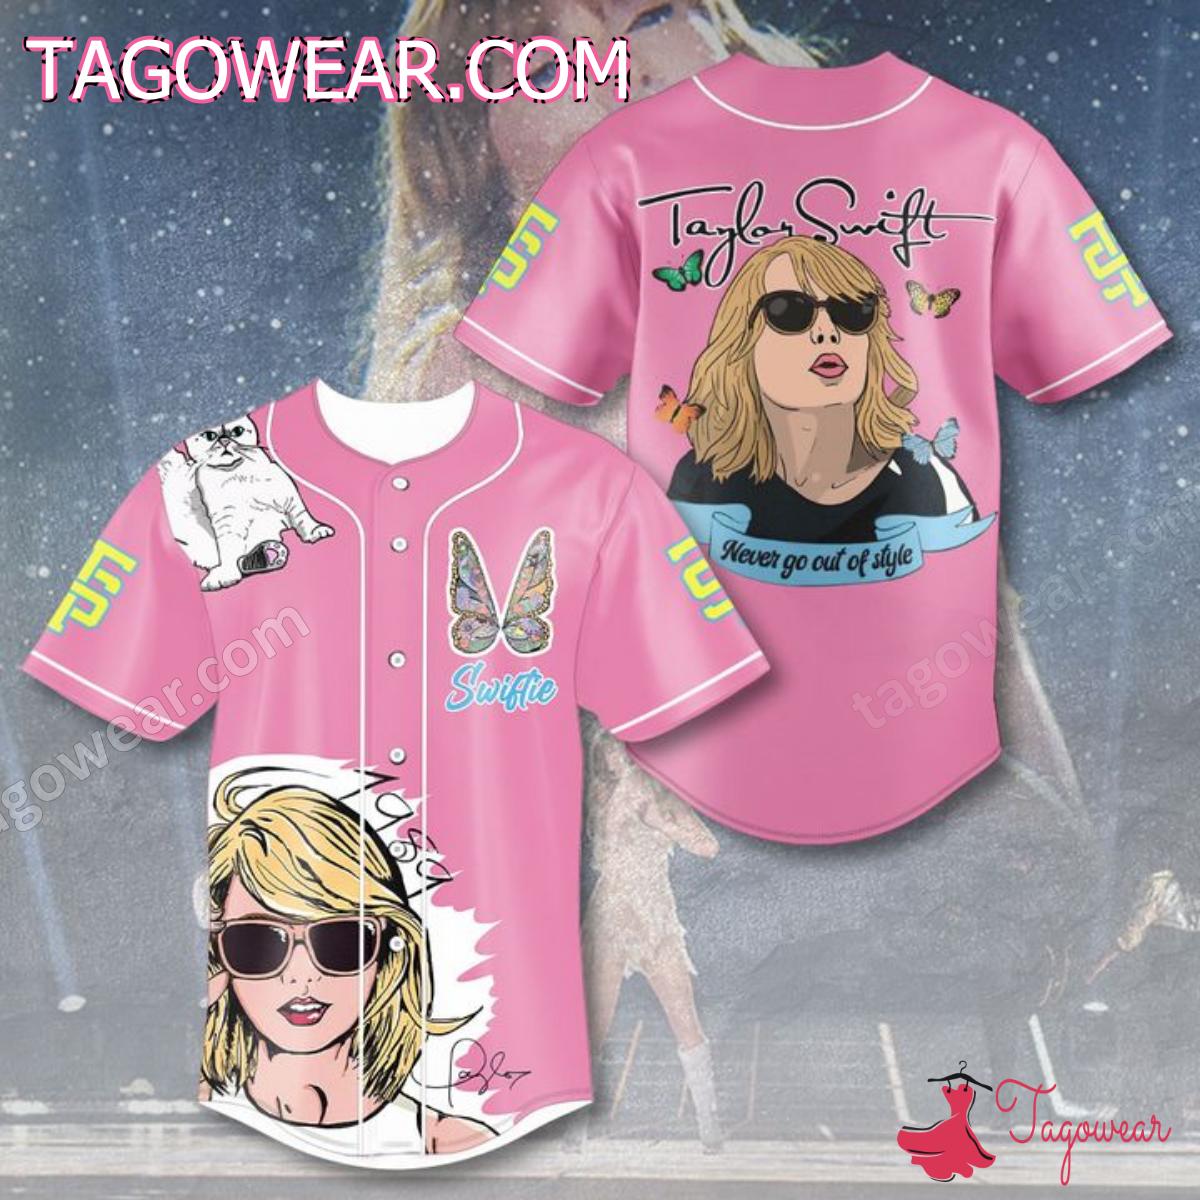 Taylor Swift Never Go Out Of Style Baseball Jersey